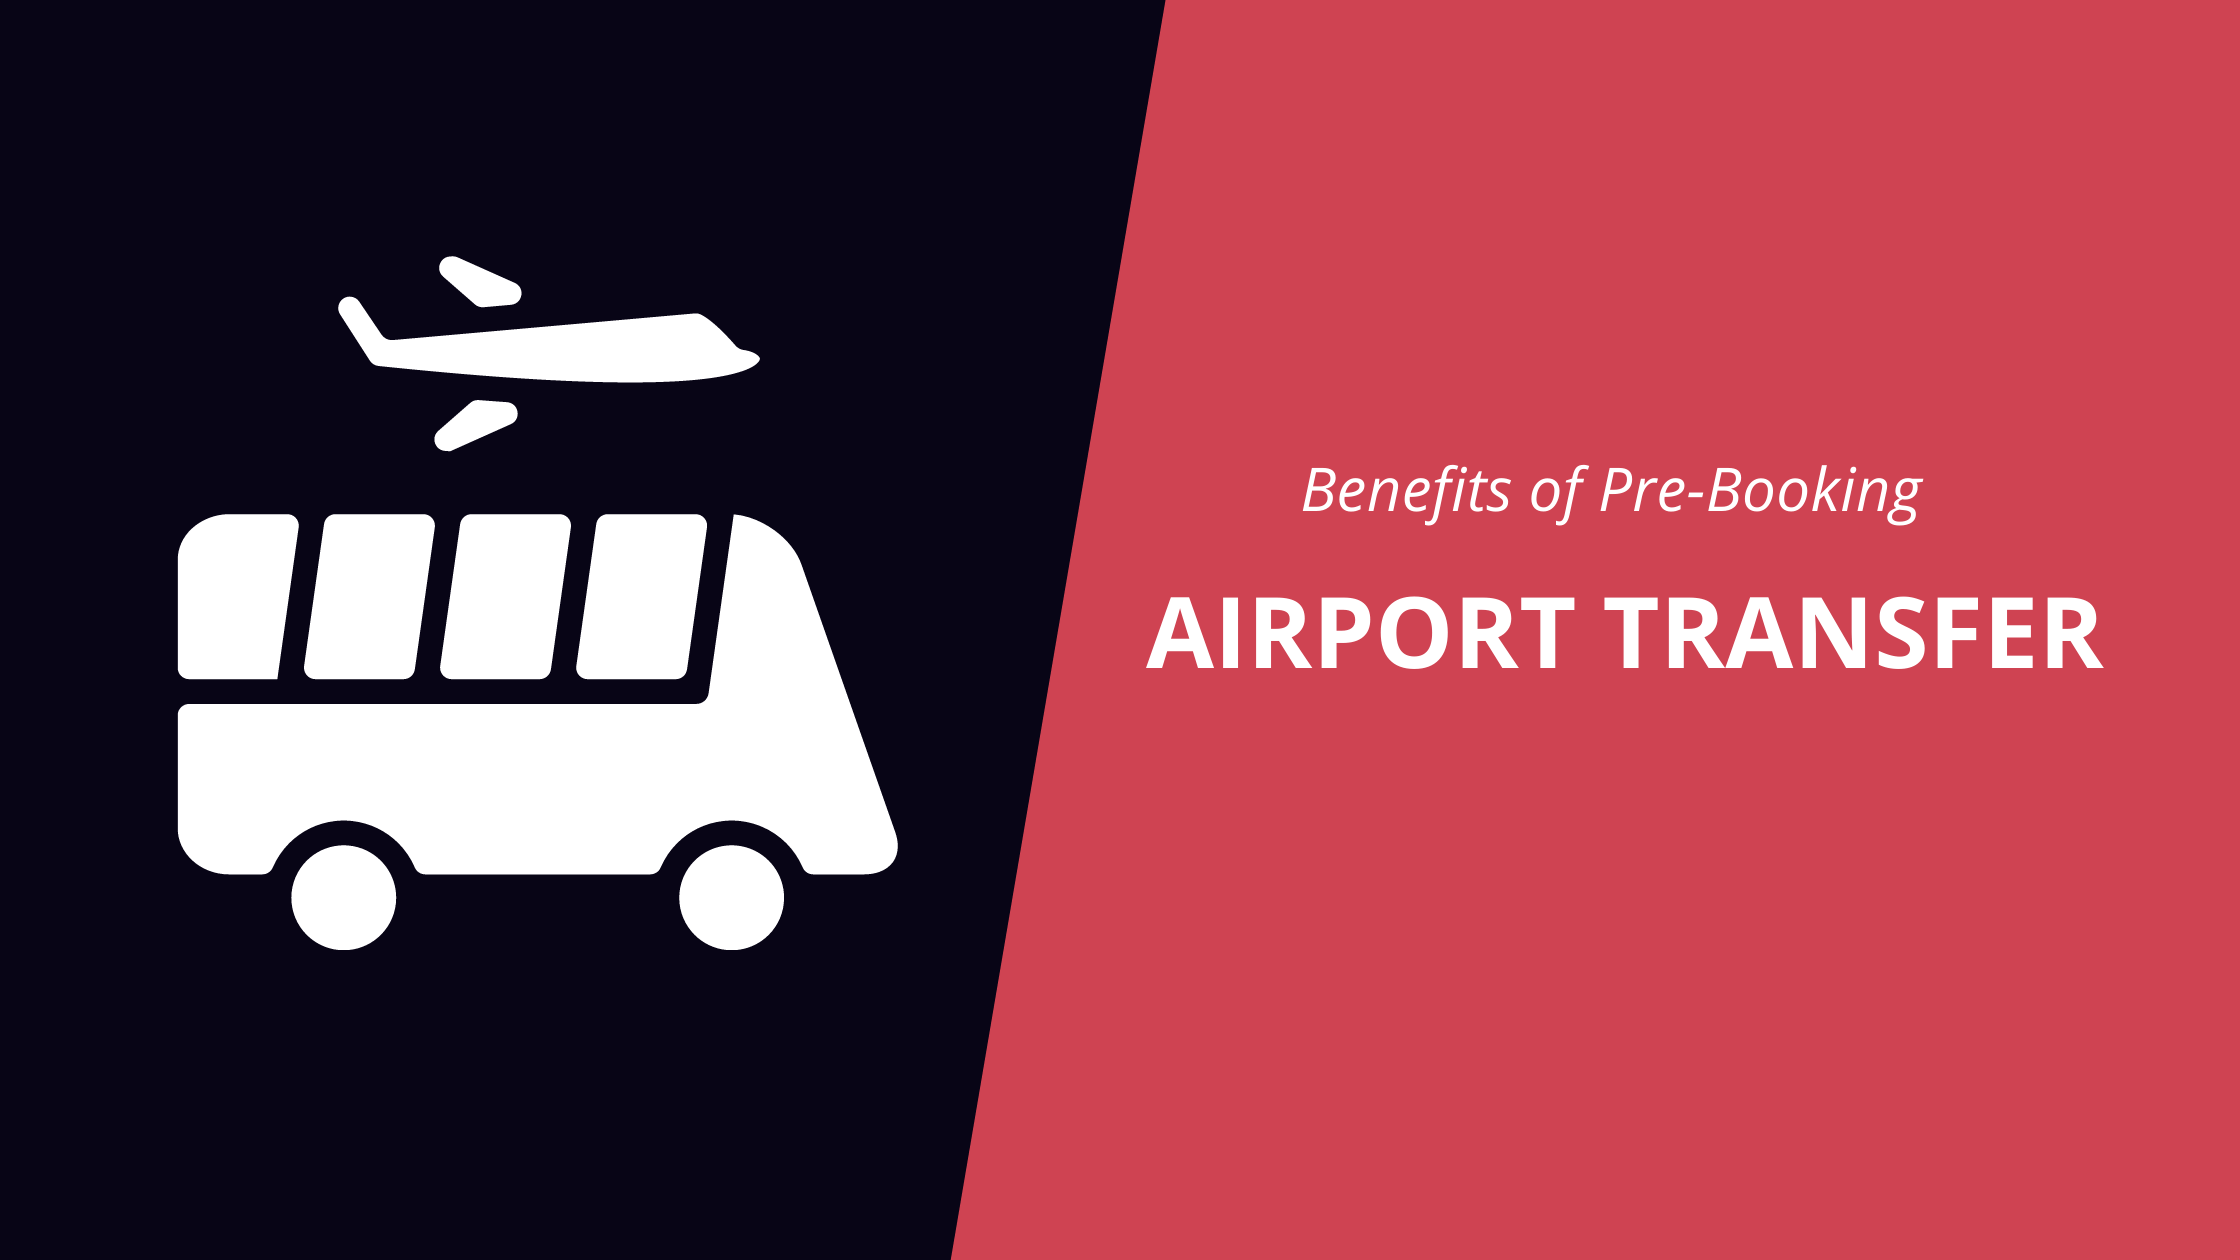 Benefits of Pre-Booking airport transfer